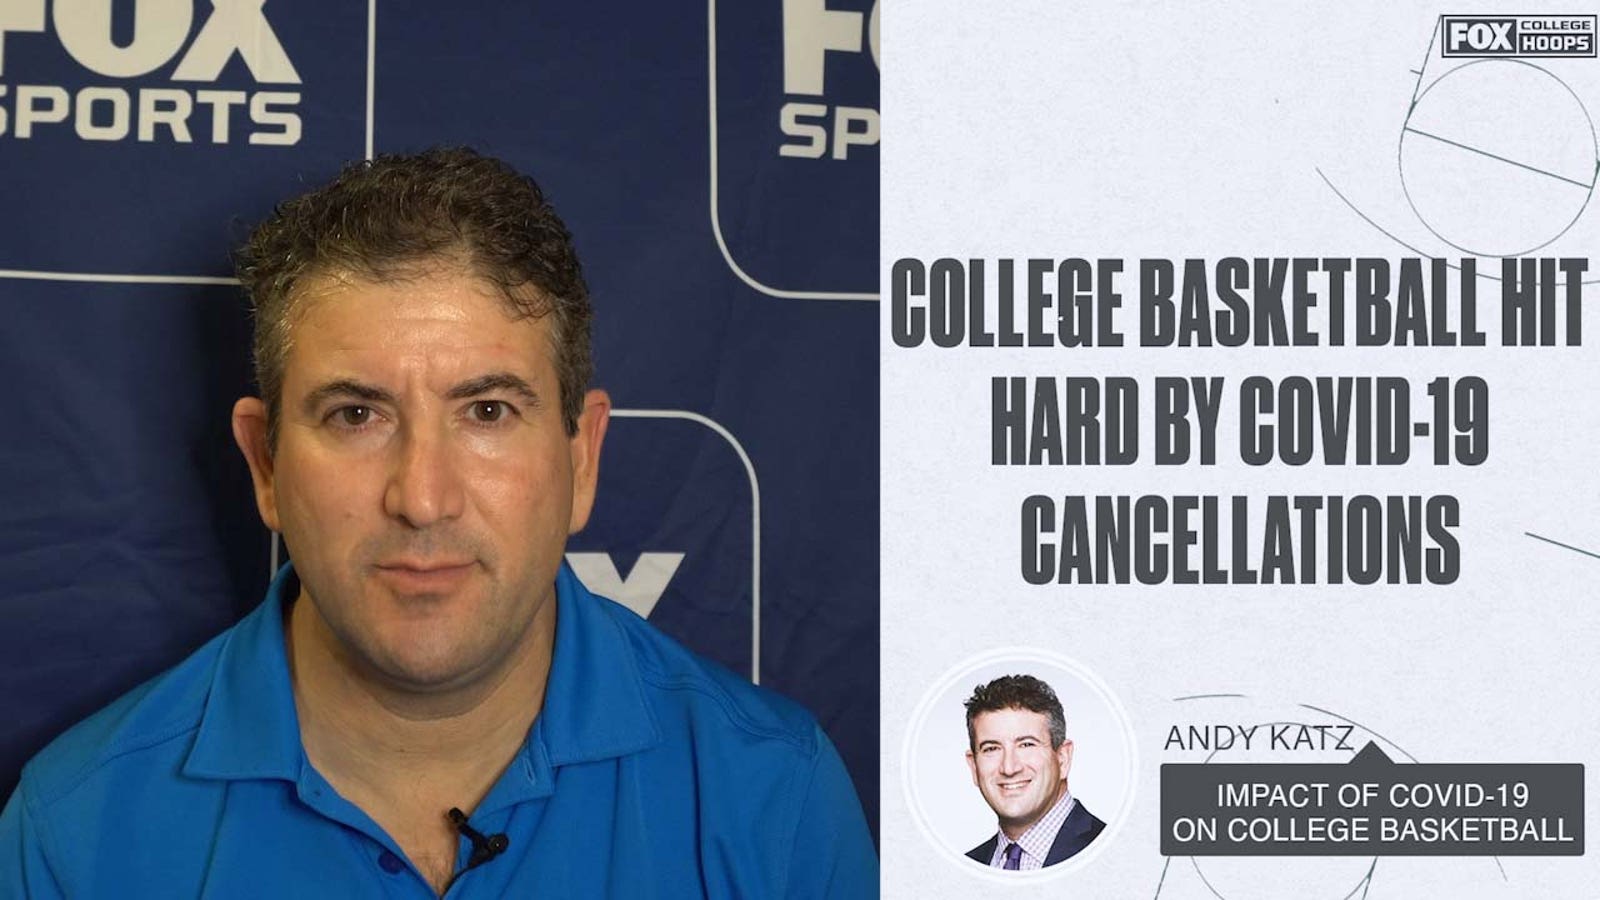 Andy Katz on the impact of COVID-19 cancellations on college basketball